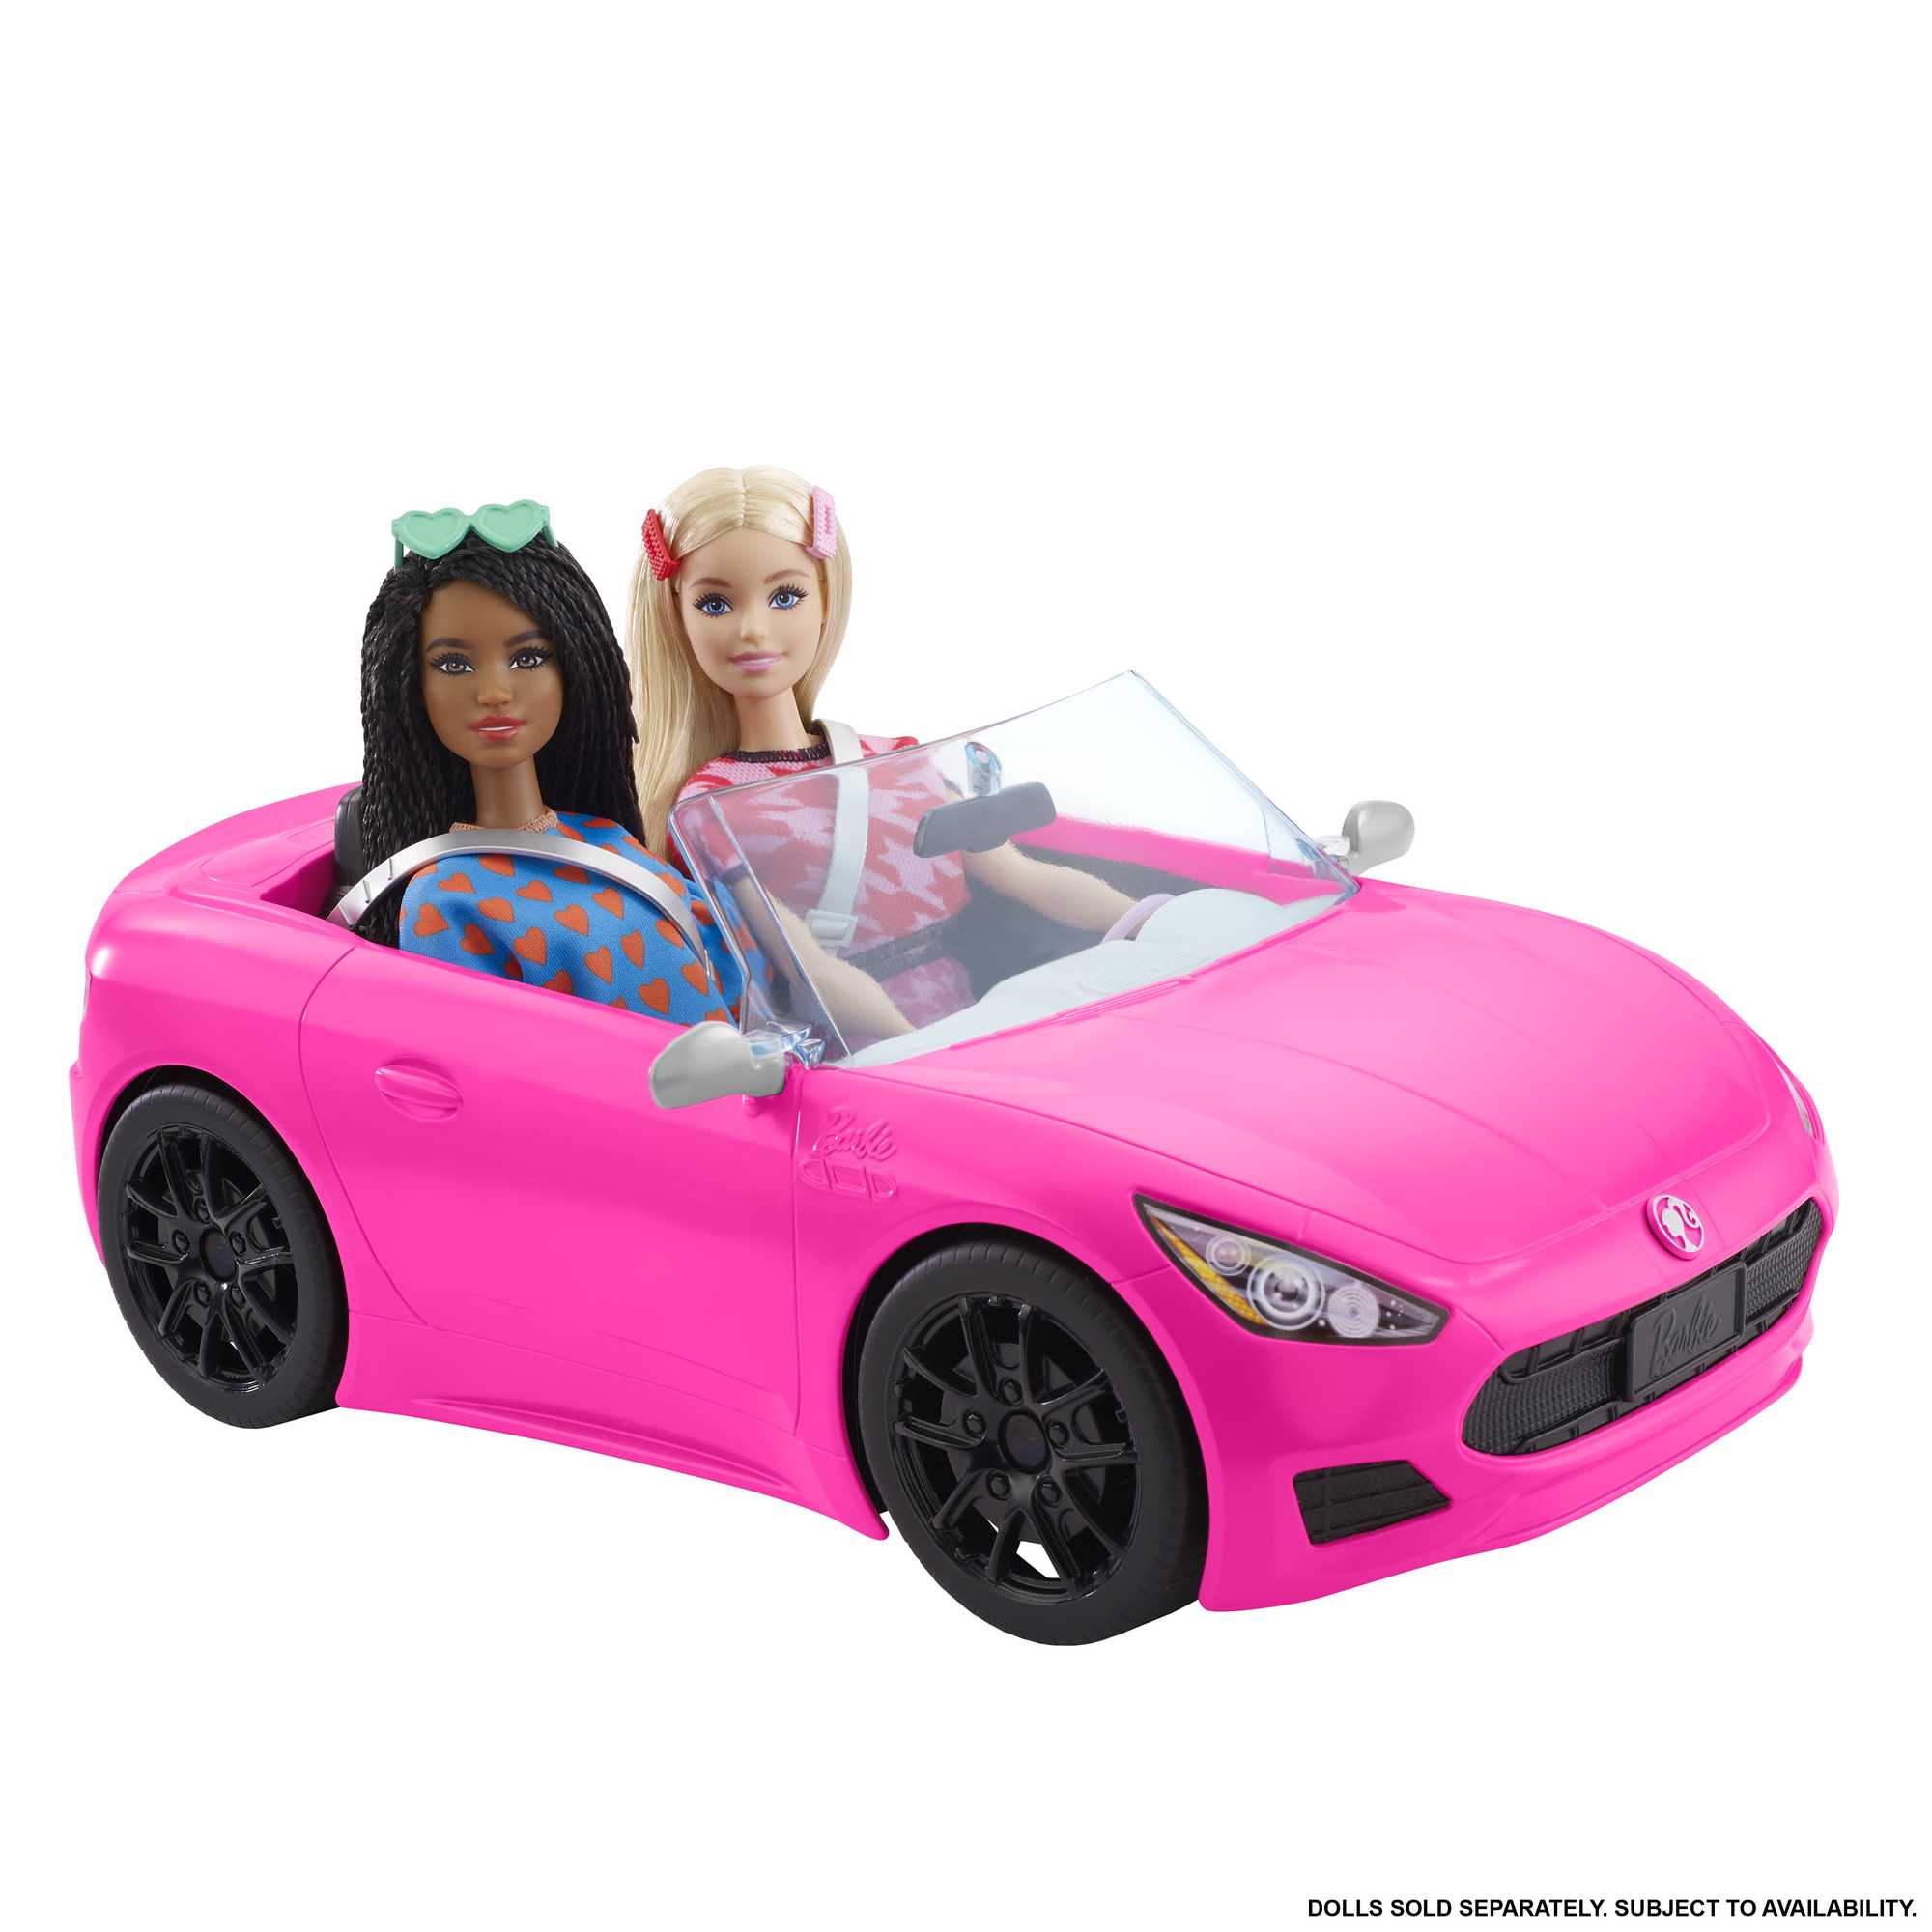 Pink Convertible Vehicle Toy with Rolling Wheels | HBT92 |